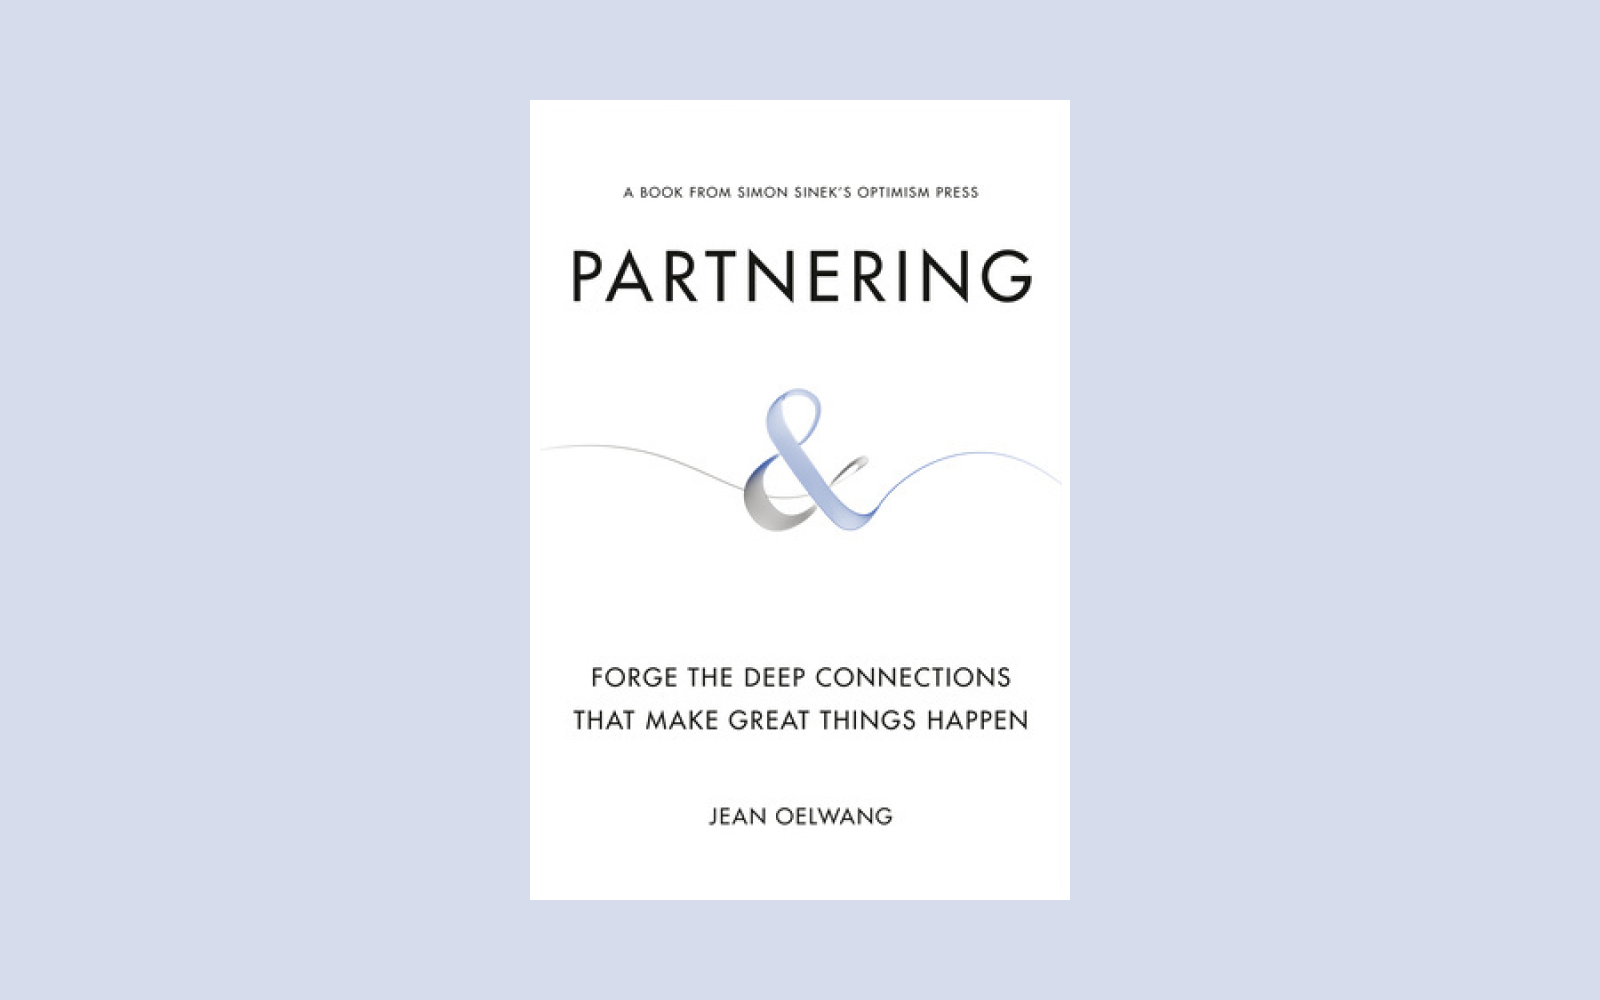 Partnering by Jean Oelwang book cover